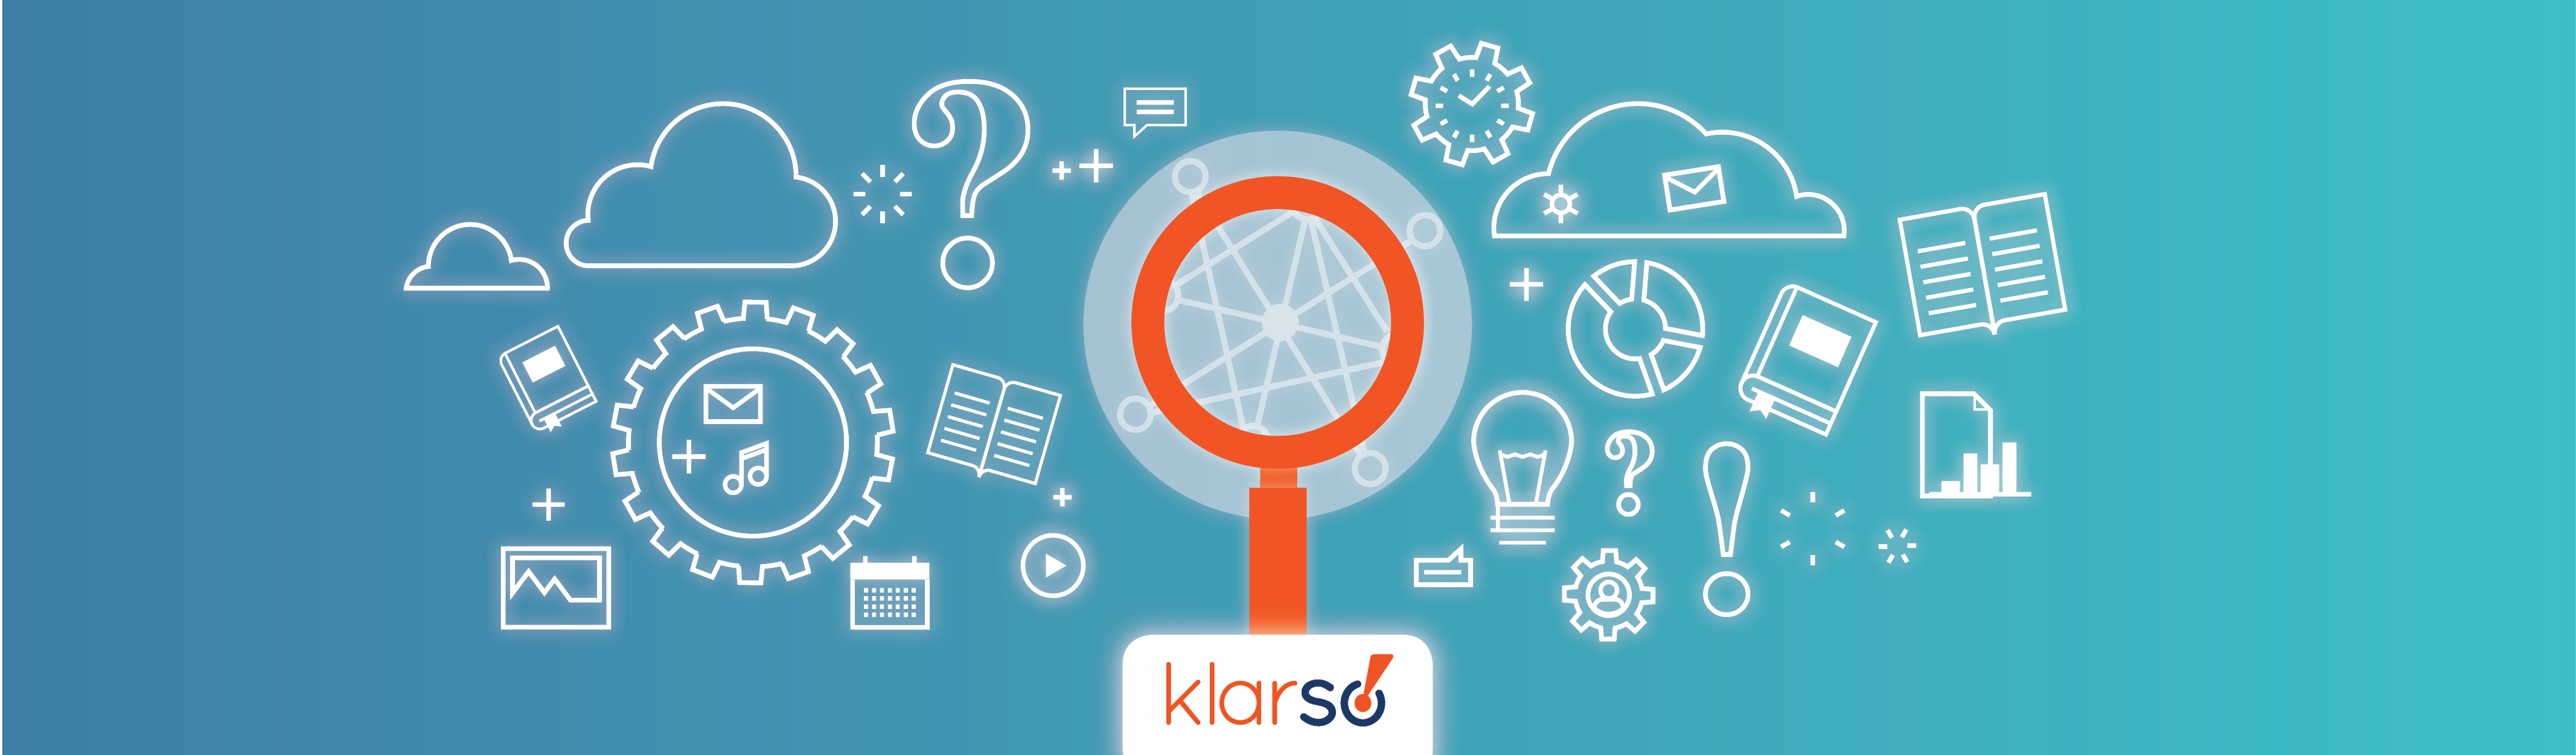 Grapic for Deep Search with klar:suite by klarso